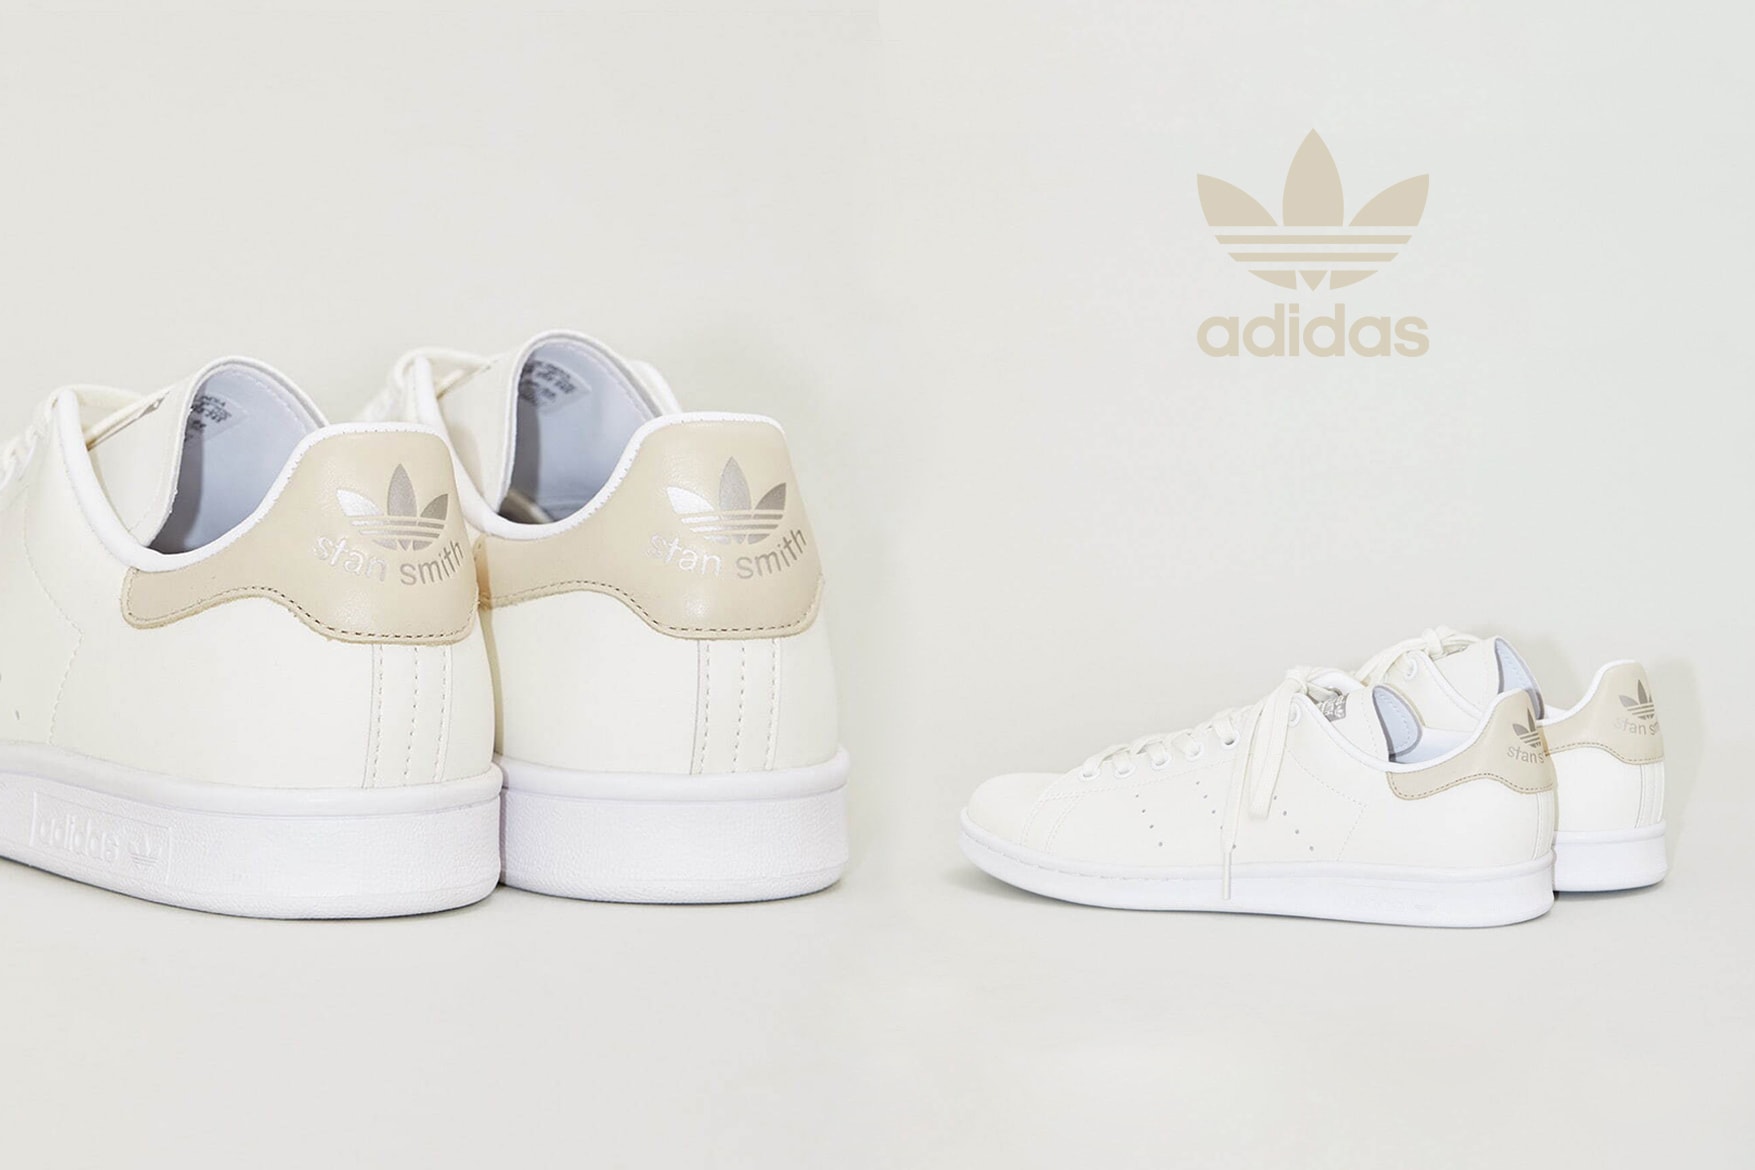 adidas-originals-for-beauty-youth-nuance-color